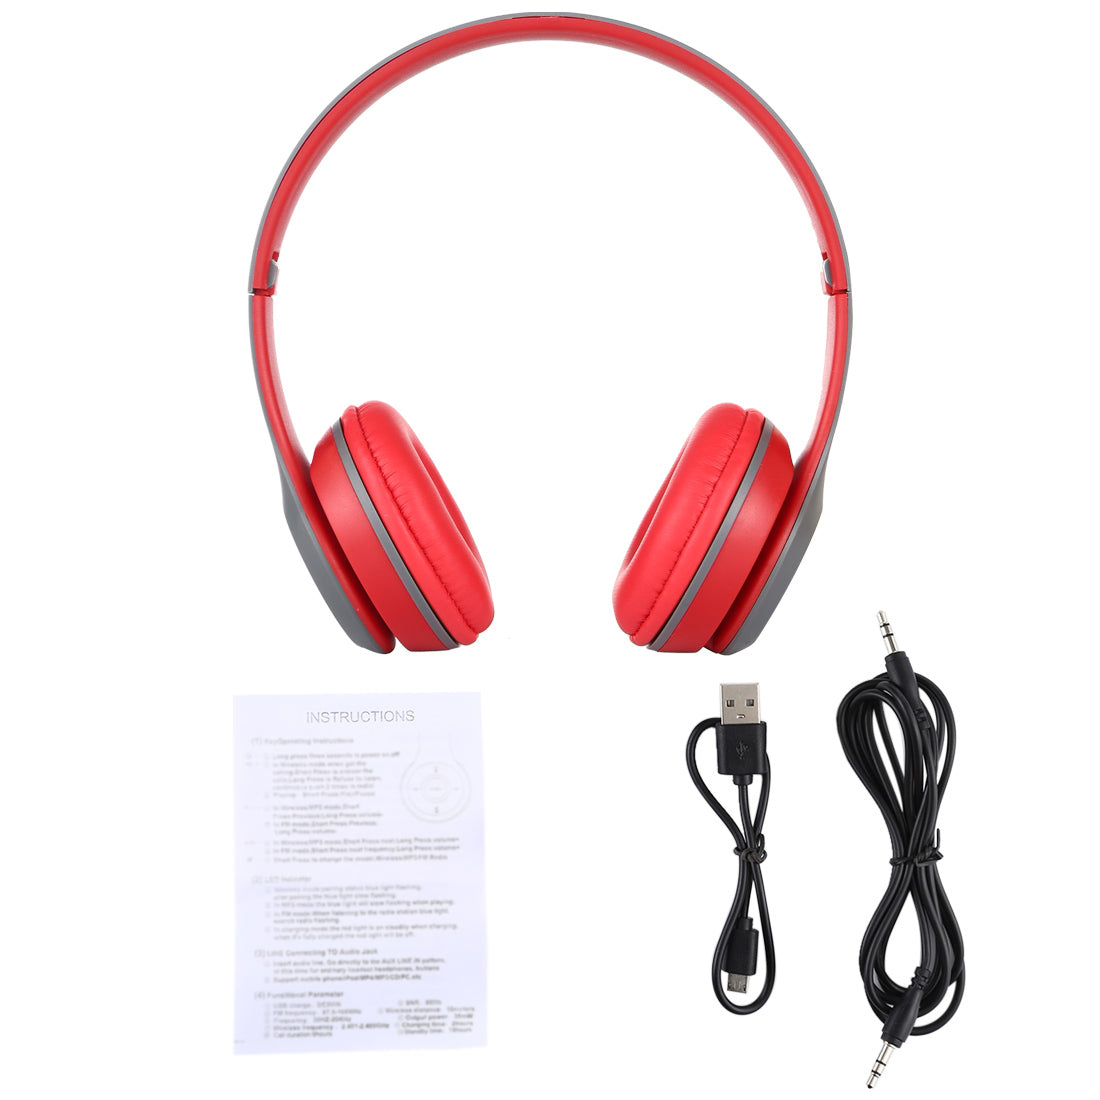 Premium Stereo Bluetooth Headphone with Call Support, Mic,  3.5mm Audio Jack, FM